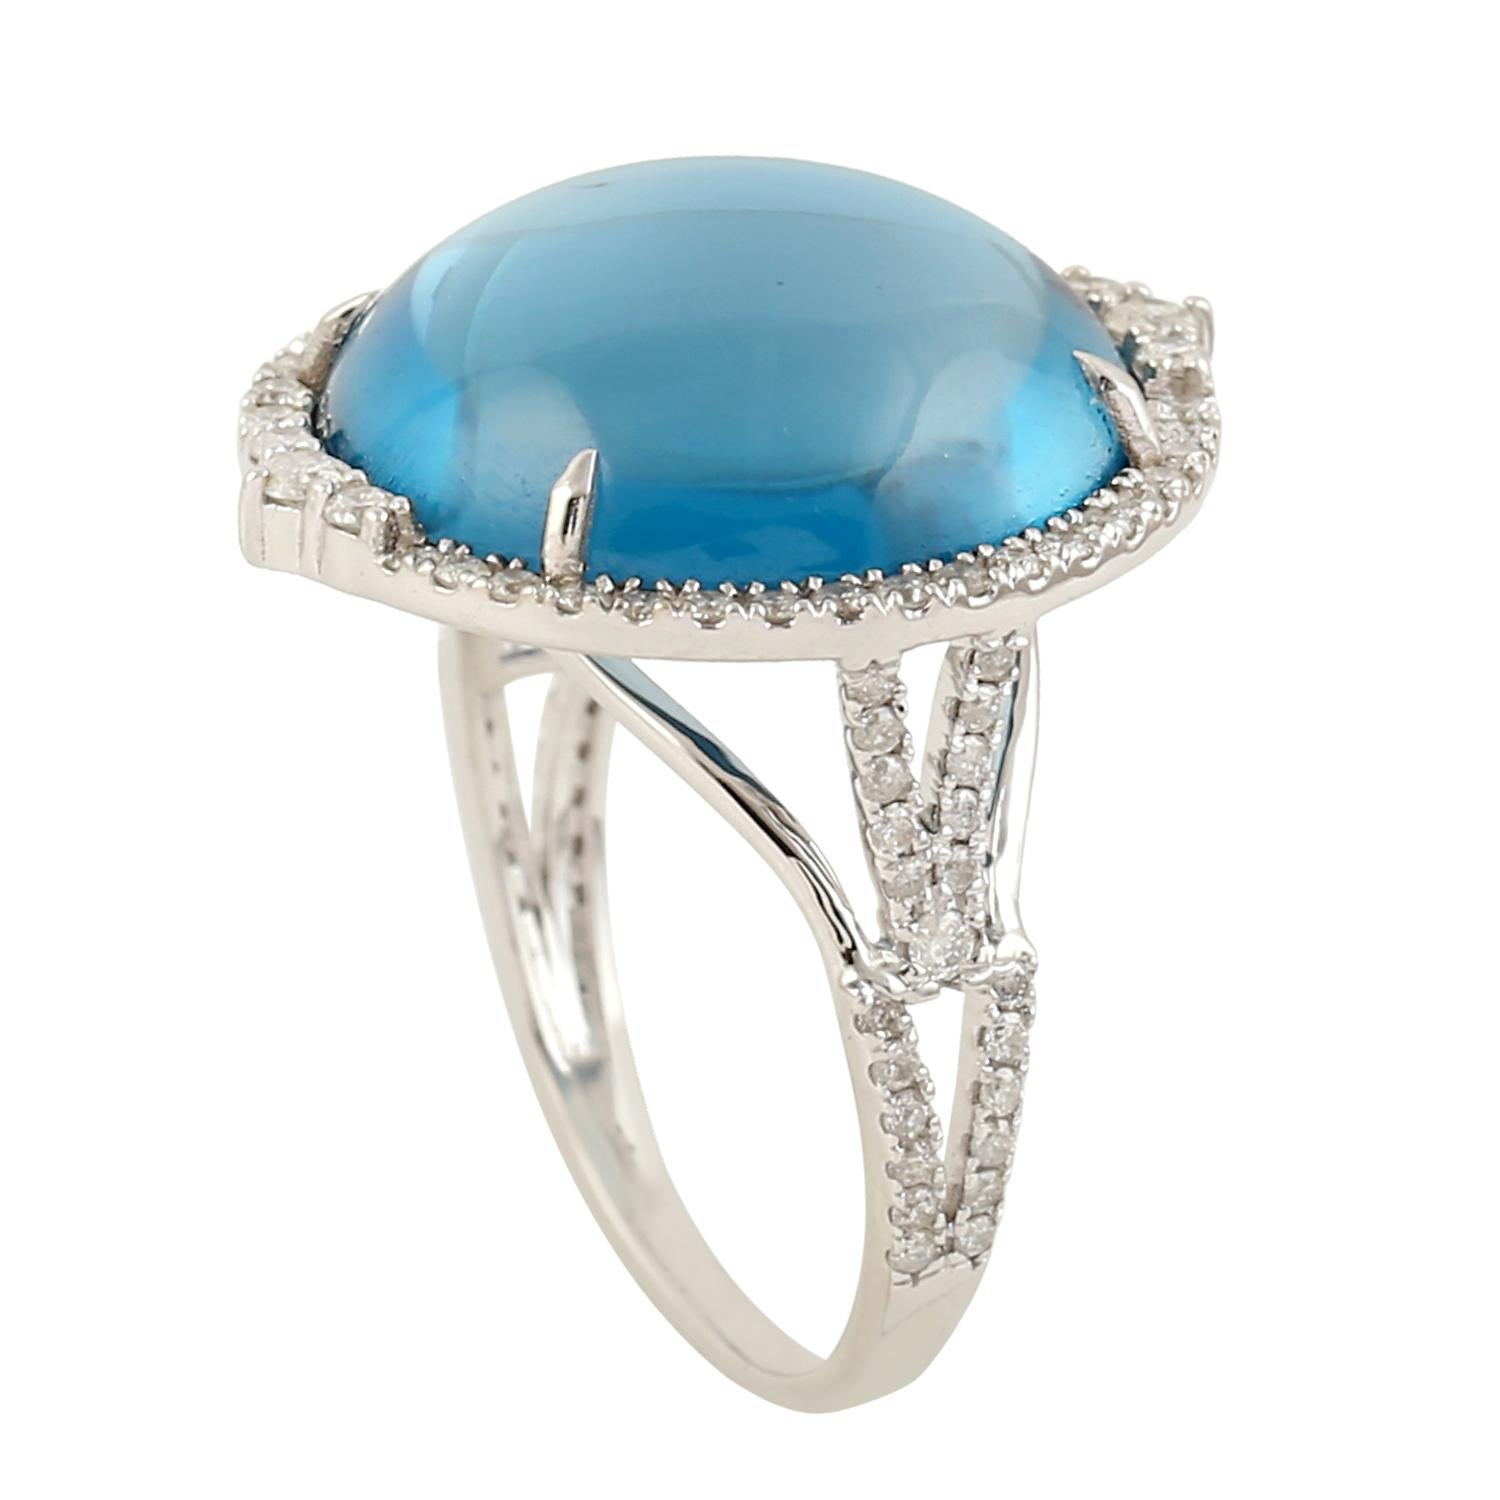 15.14 ct Oval Shaped Blue Topaz Cocktail Ring w/ Diamonds Made In 18k White Gold In New Condition For Sale In New York, NY